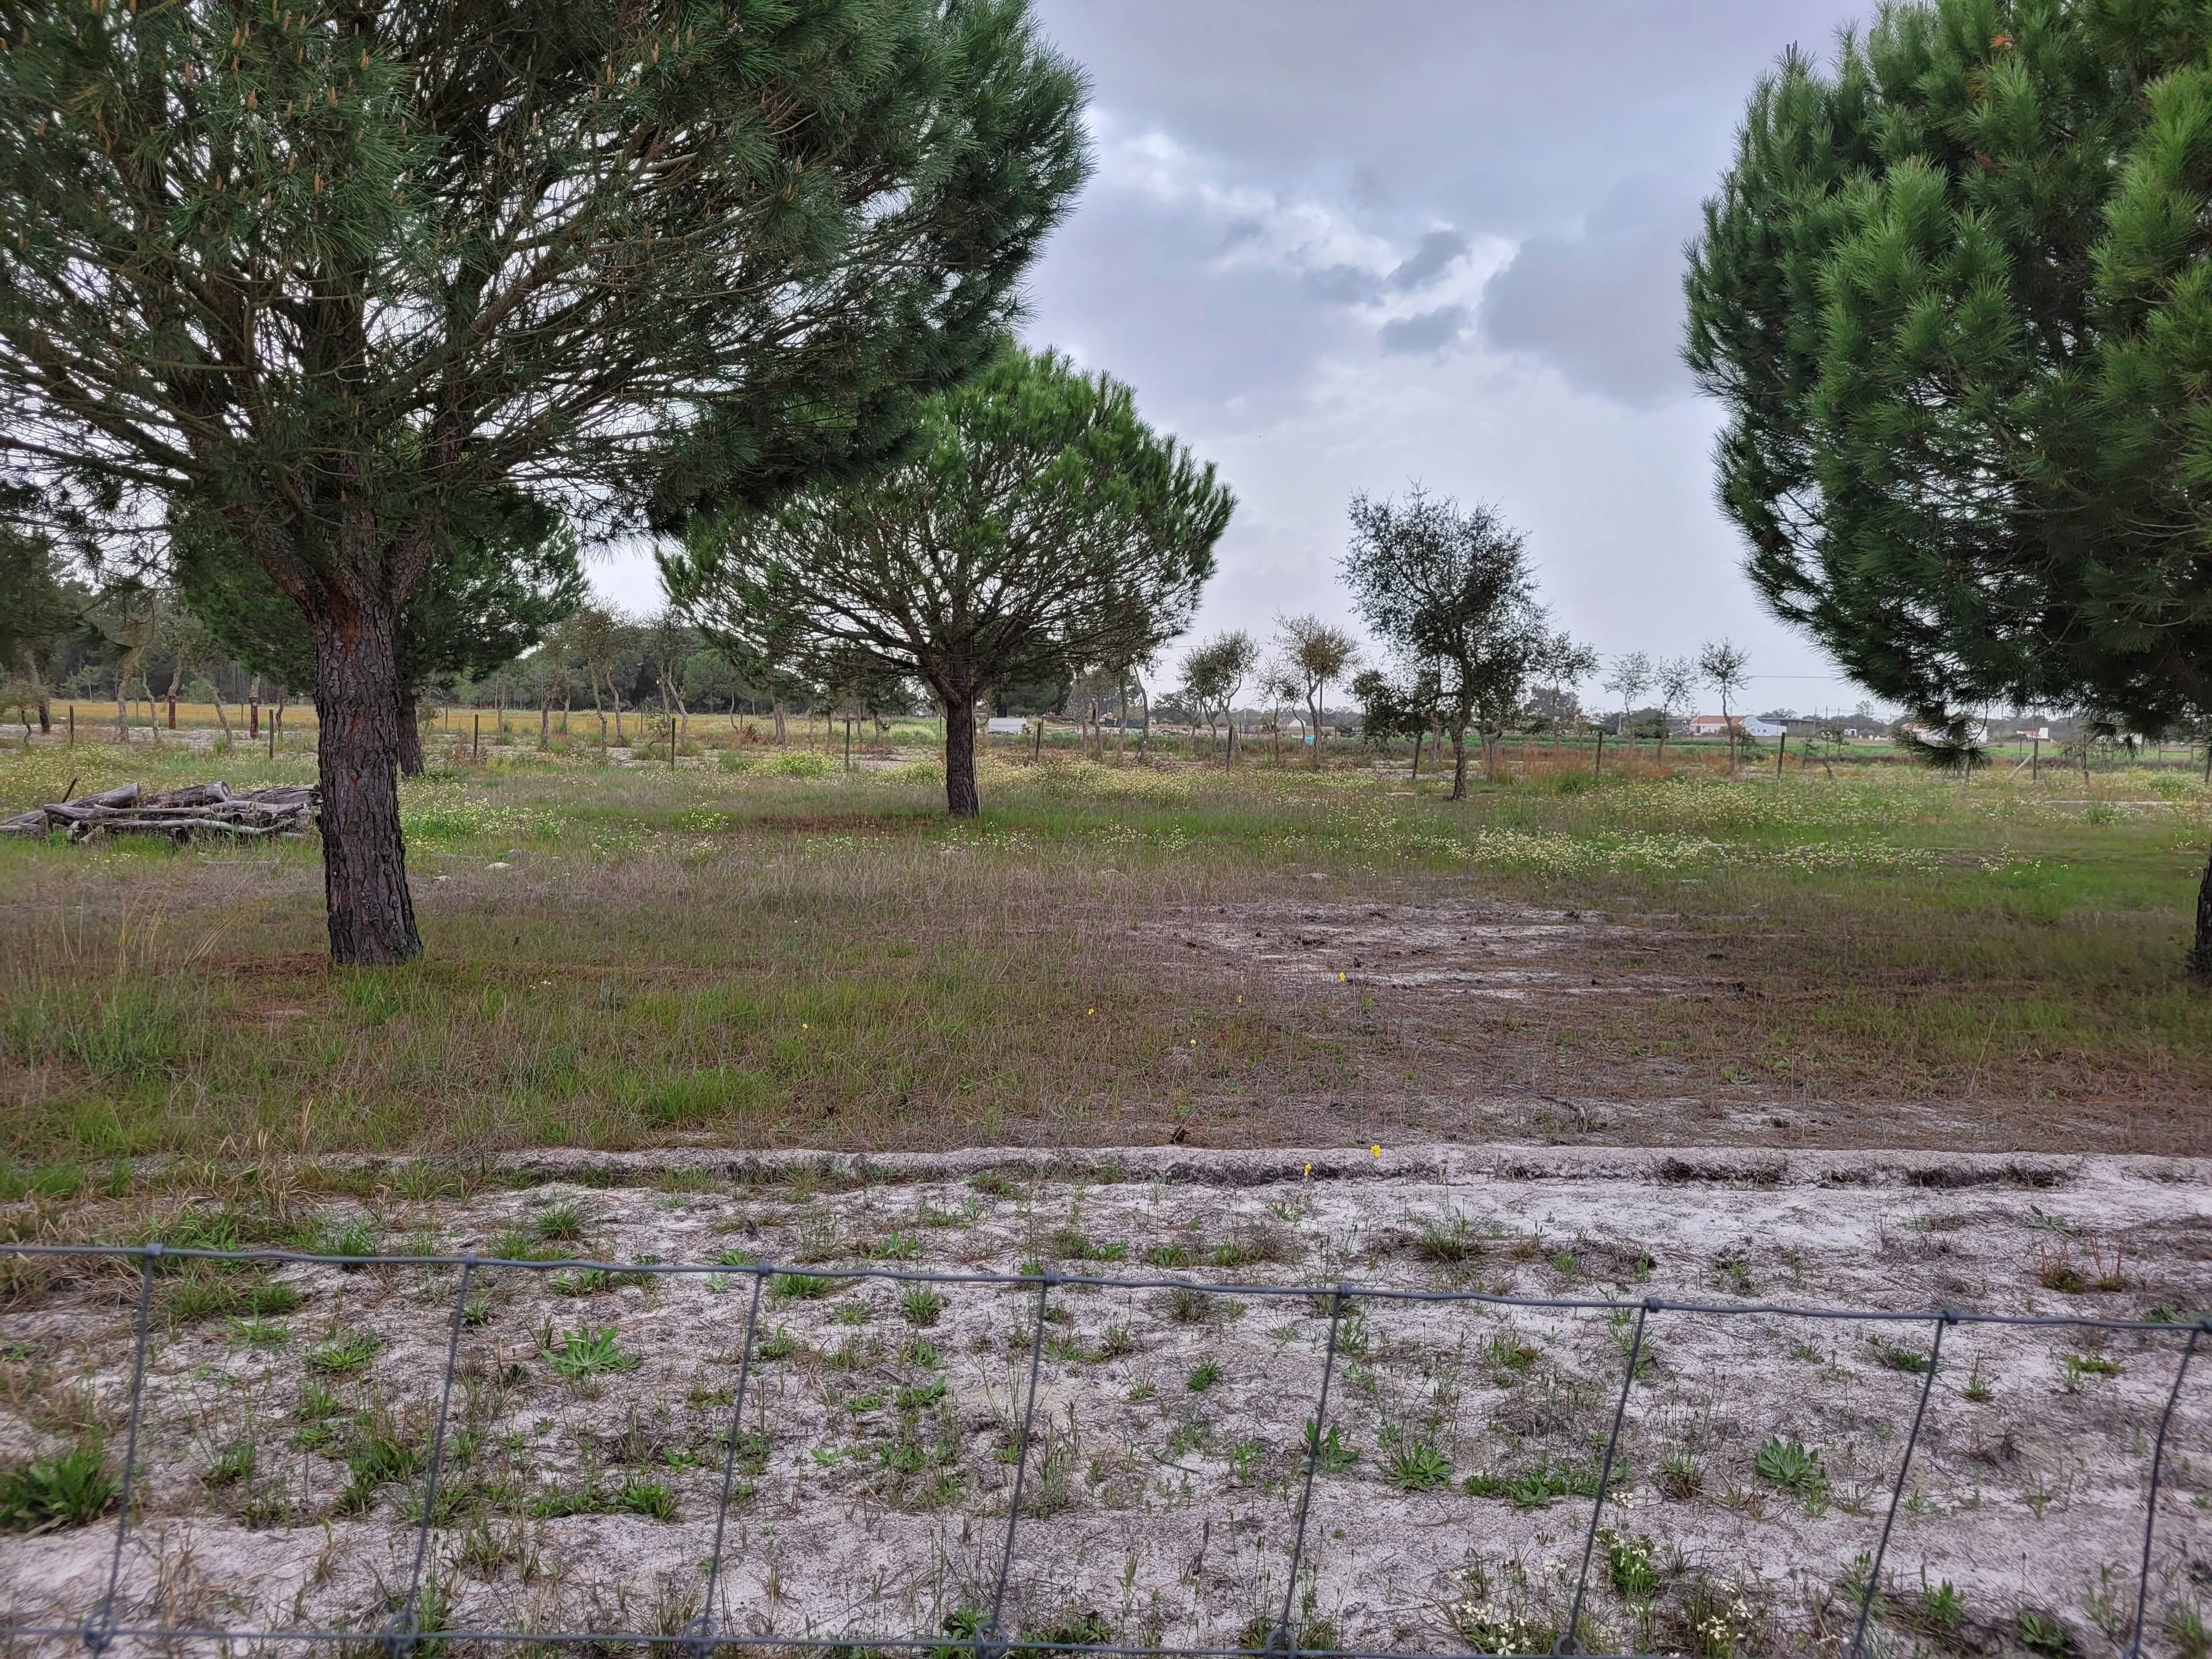 Prime Investment Opportunity: Rustic Land and Urban Building with Project, 30 Minutes from Comporta and Melides, Grândola